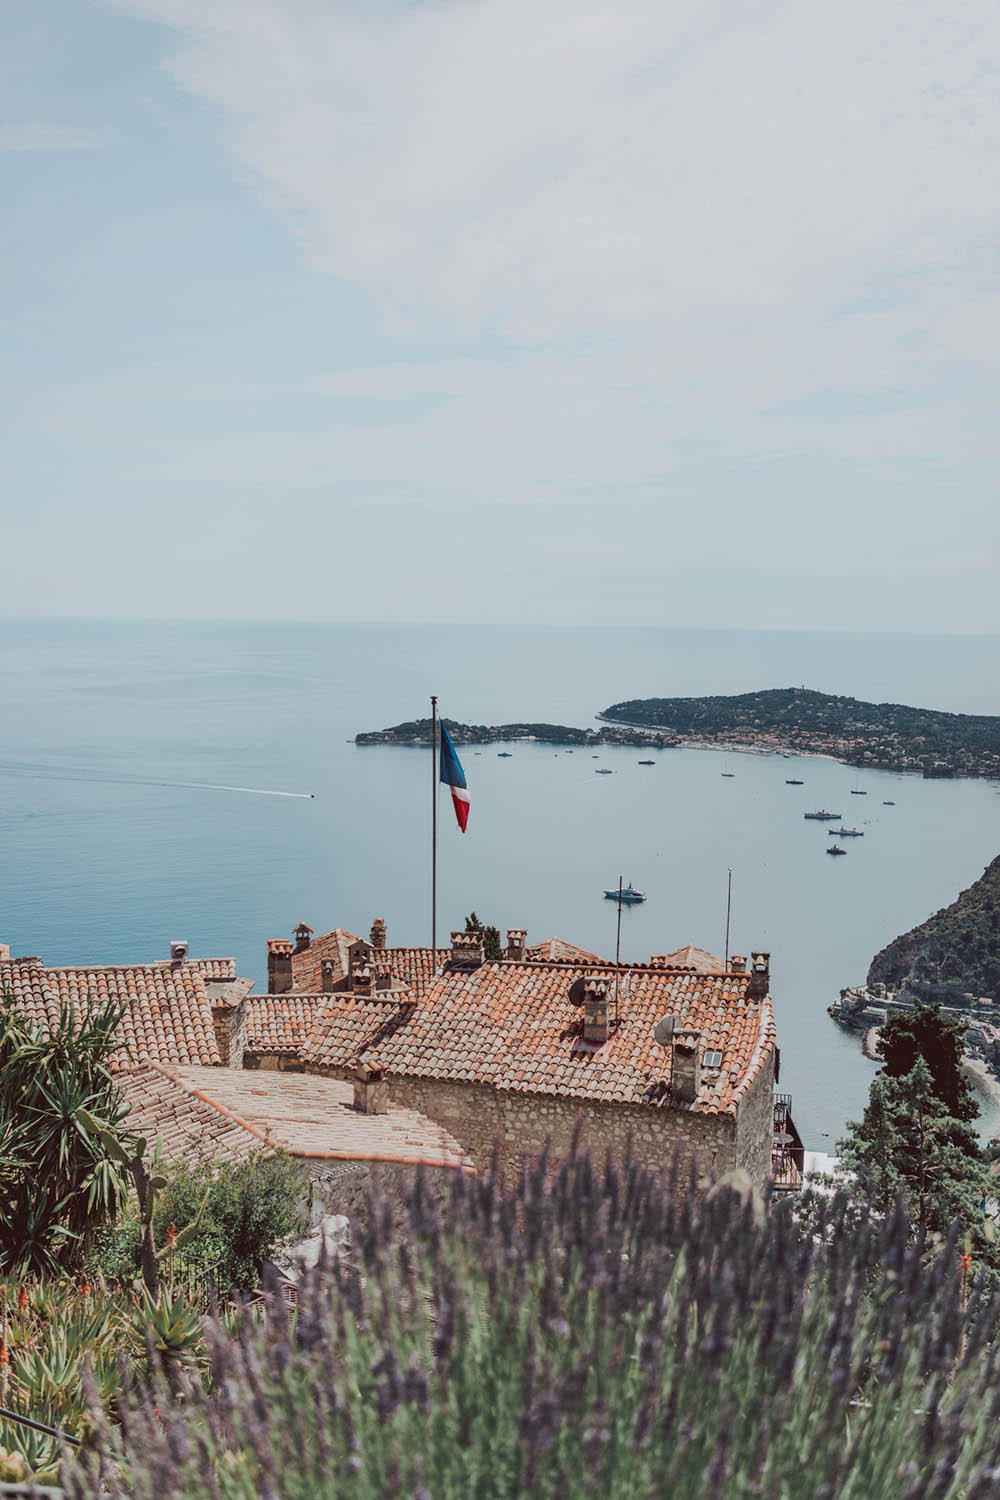 Day Trip To Eze Village South of France Complete Guide - Perched on a hill over the Mediterranean Sea, the medieval French town is a must if you are visiting the Côte d'Azur. 